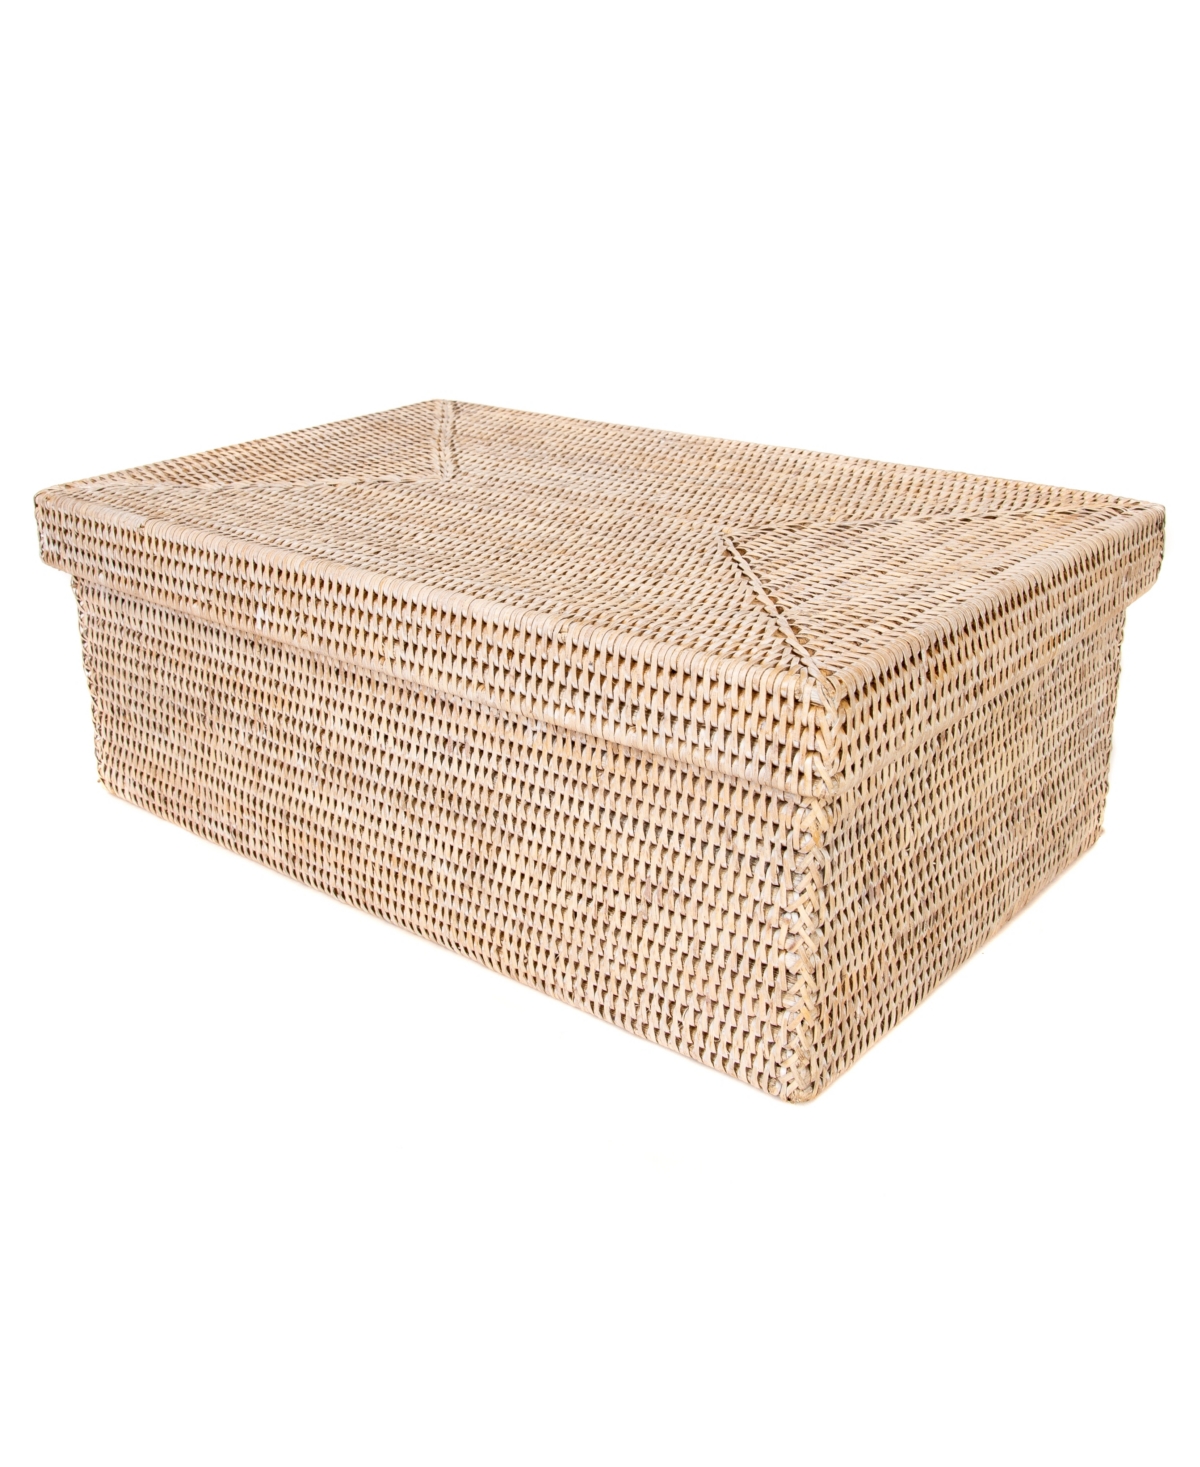 Artifacts Trading Company Artifacts Rattan Rectangular Storage Box With Lid In Off-white